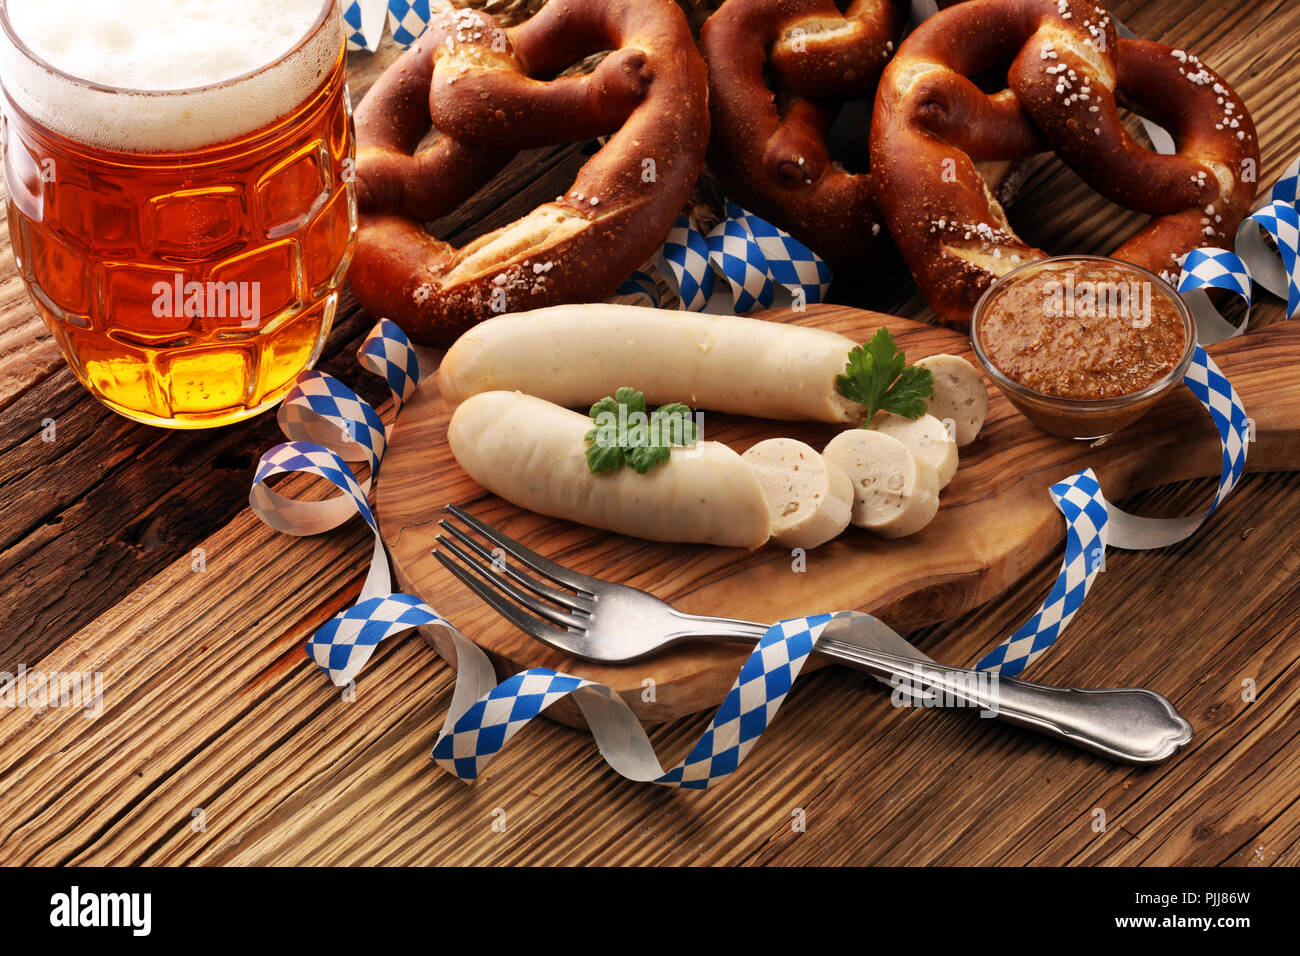 Bavarian veal sausage breakfast with sausages, soft pretzel and mild mustard on wooden board from Germany. Stock Photo